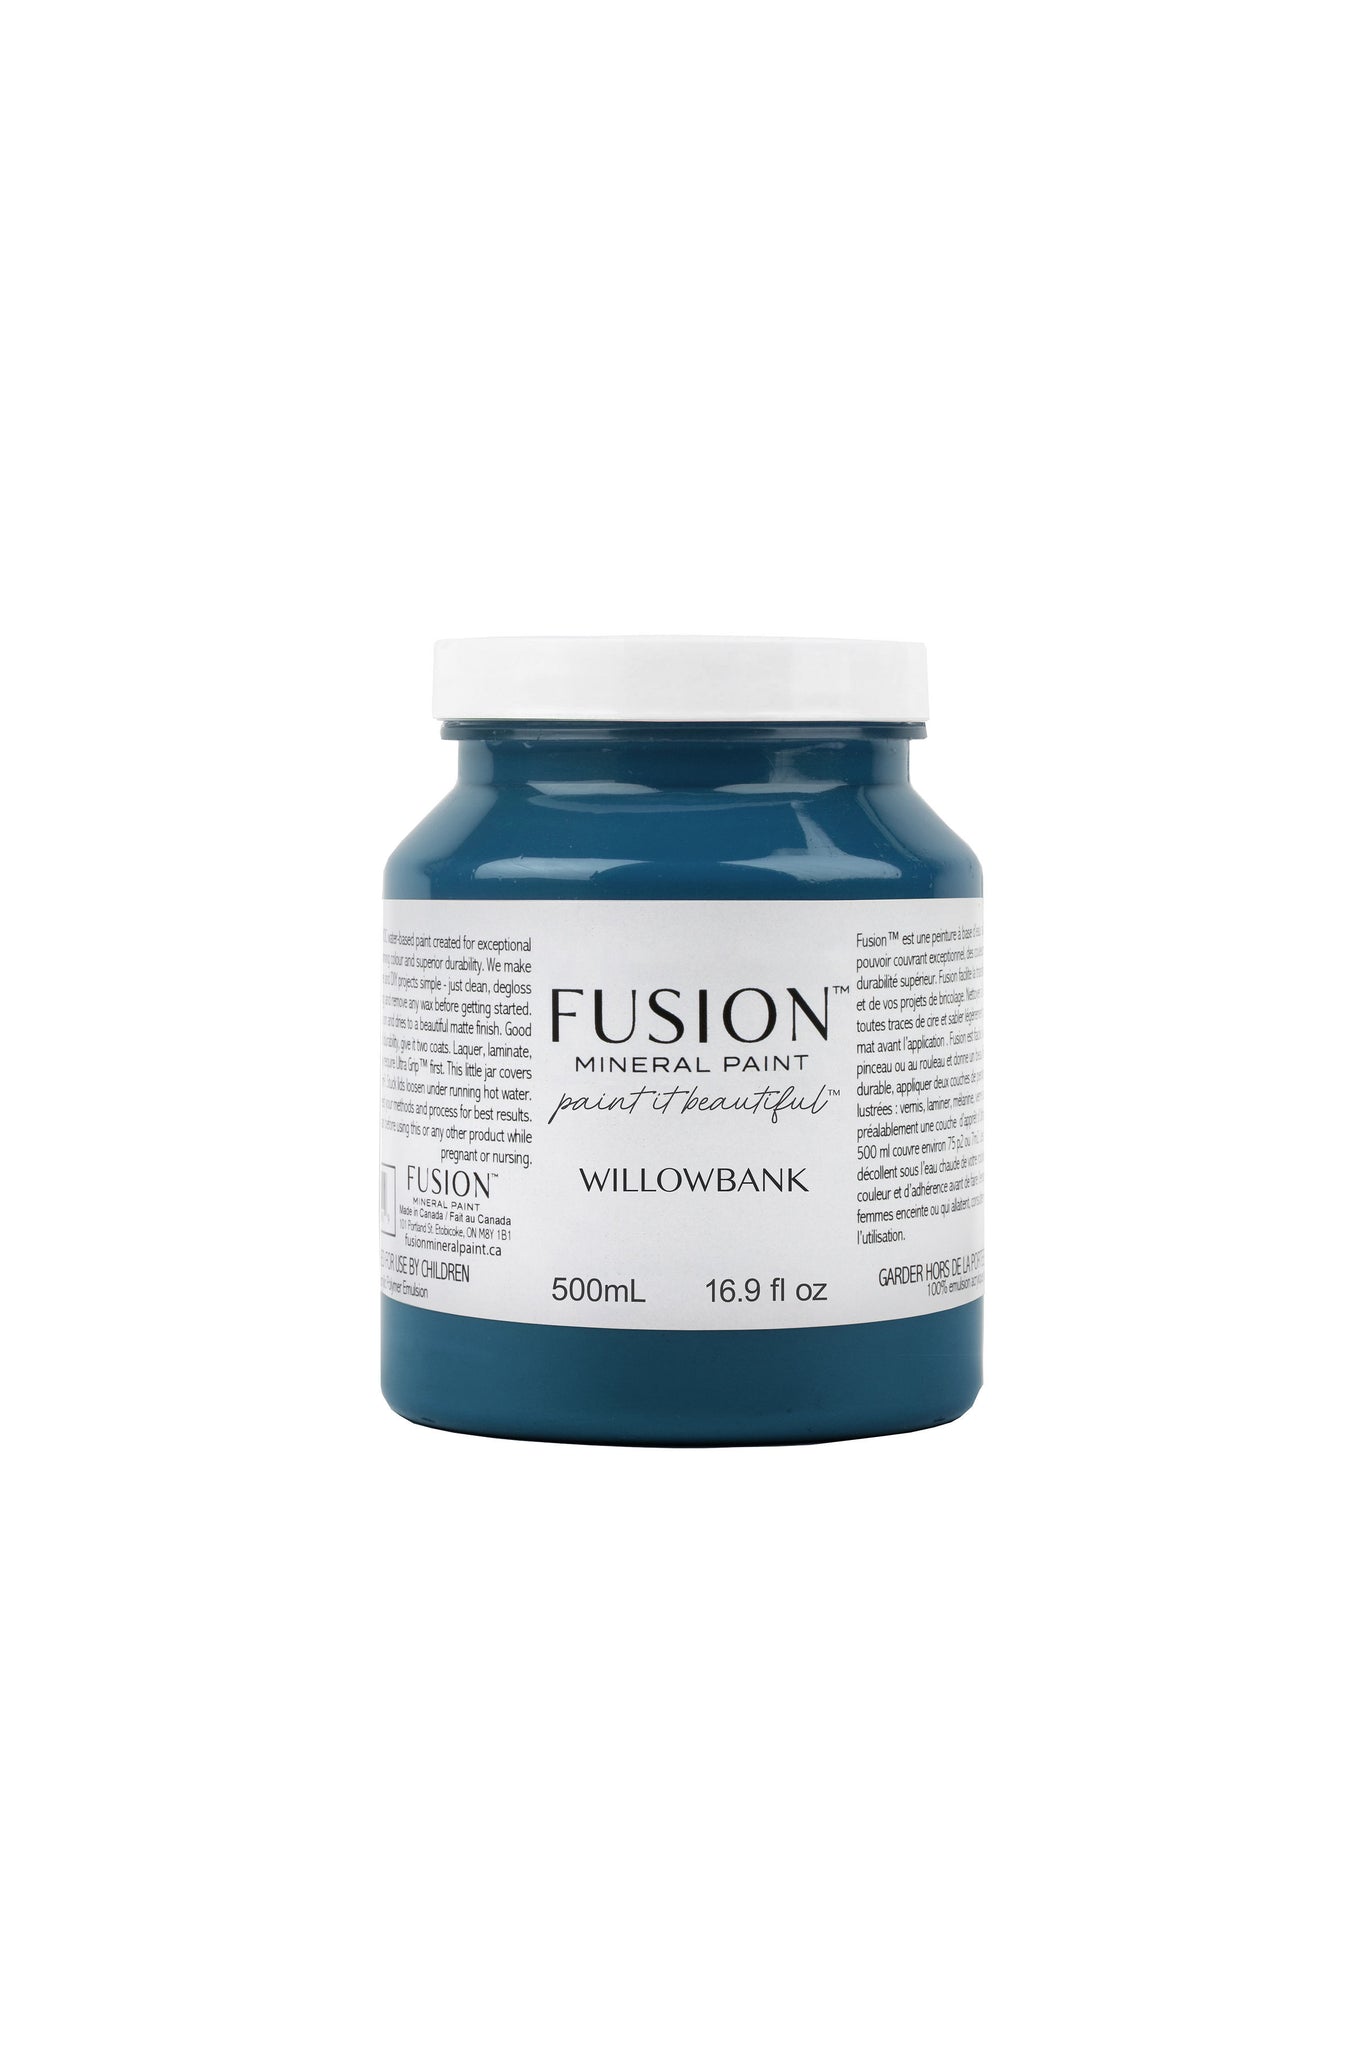 Willowbank - Fusion Mineral Paint -NEW COLOURS SUMMER 2022